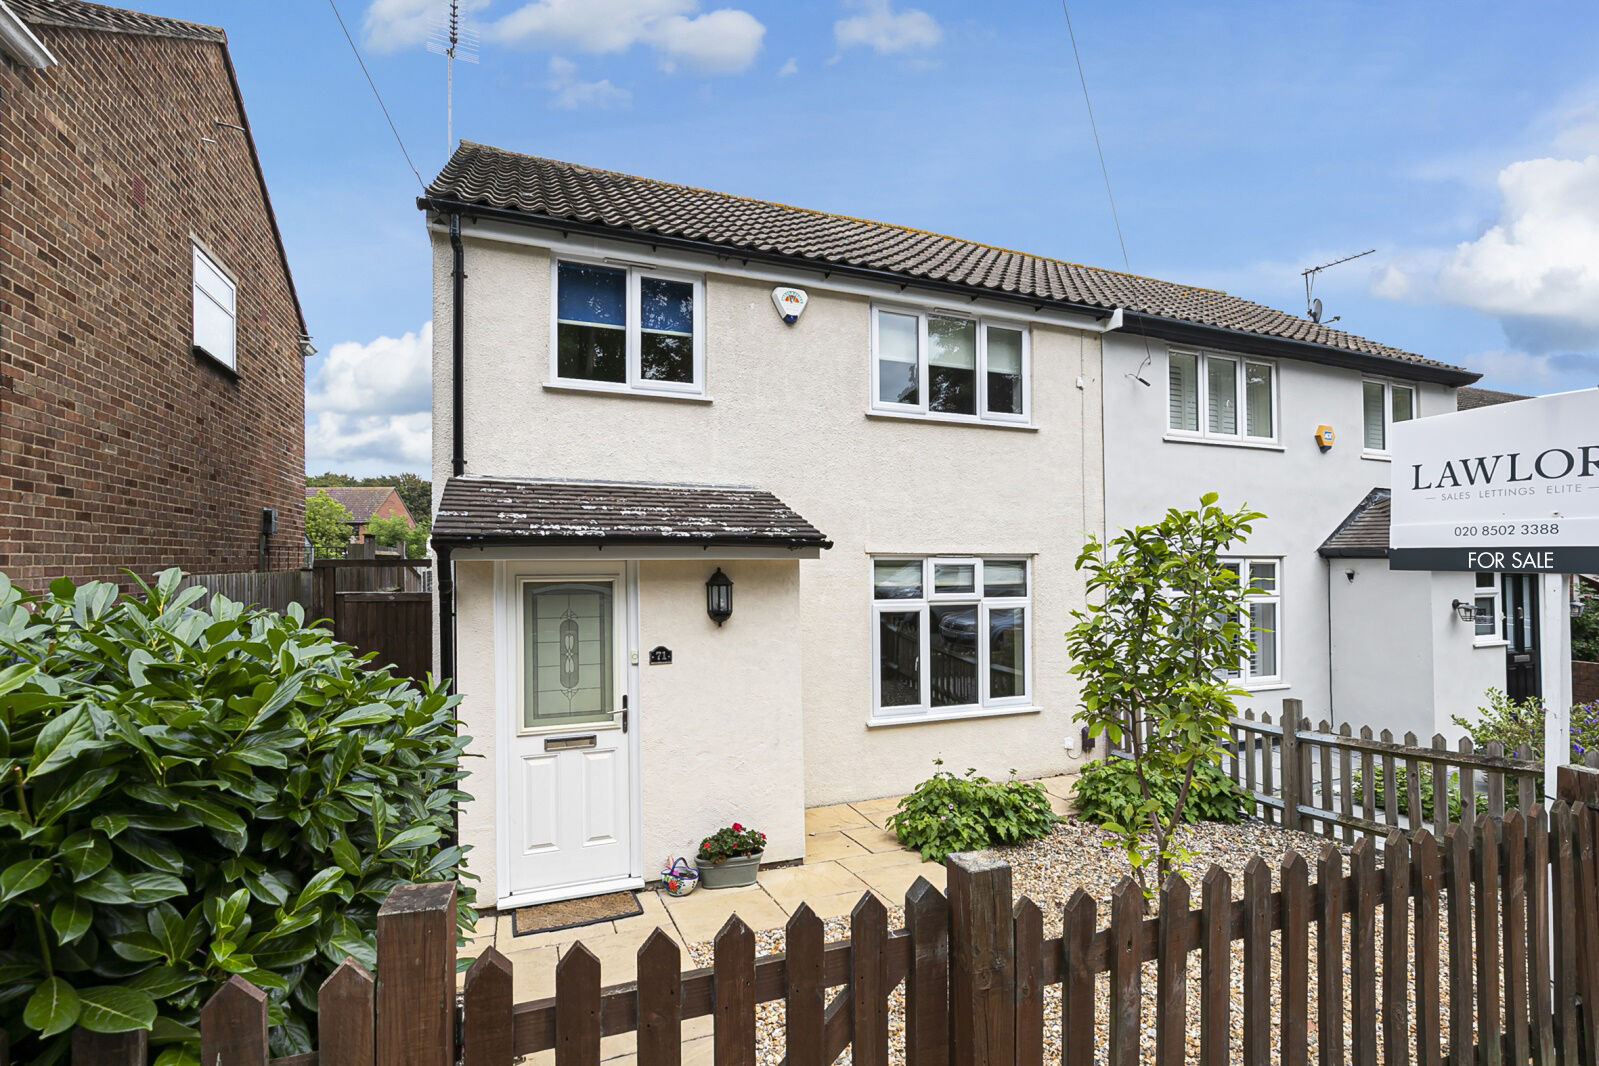 3 bedroom semi detached house for sale Lower Queens Road, Buckhurst Hill, IG9, main image